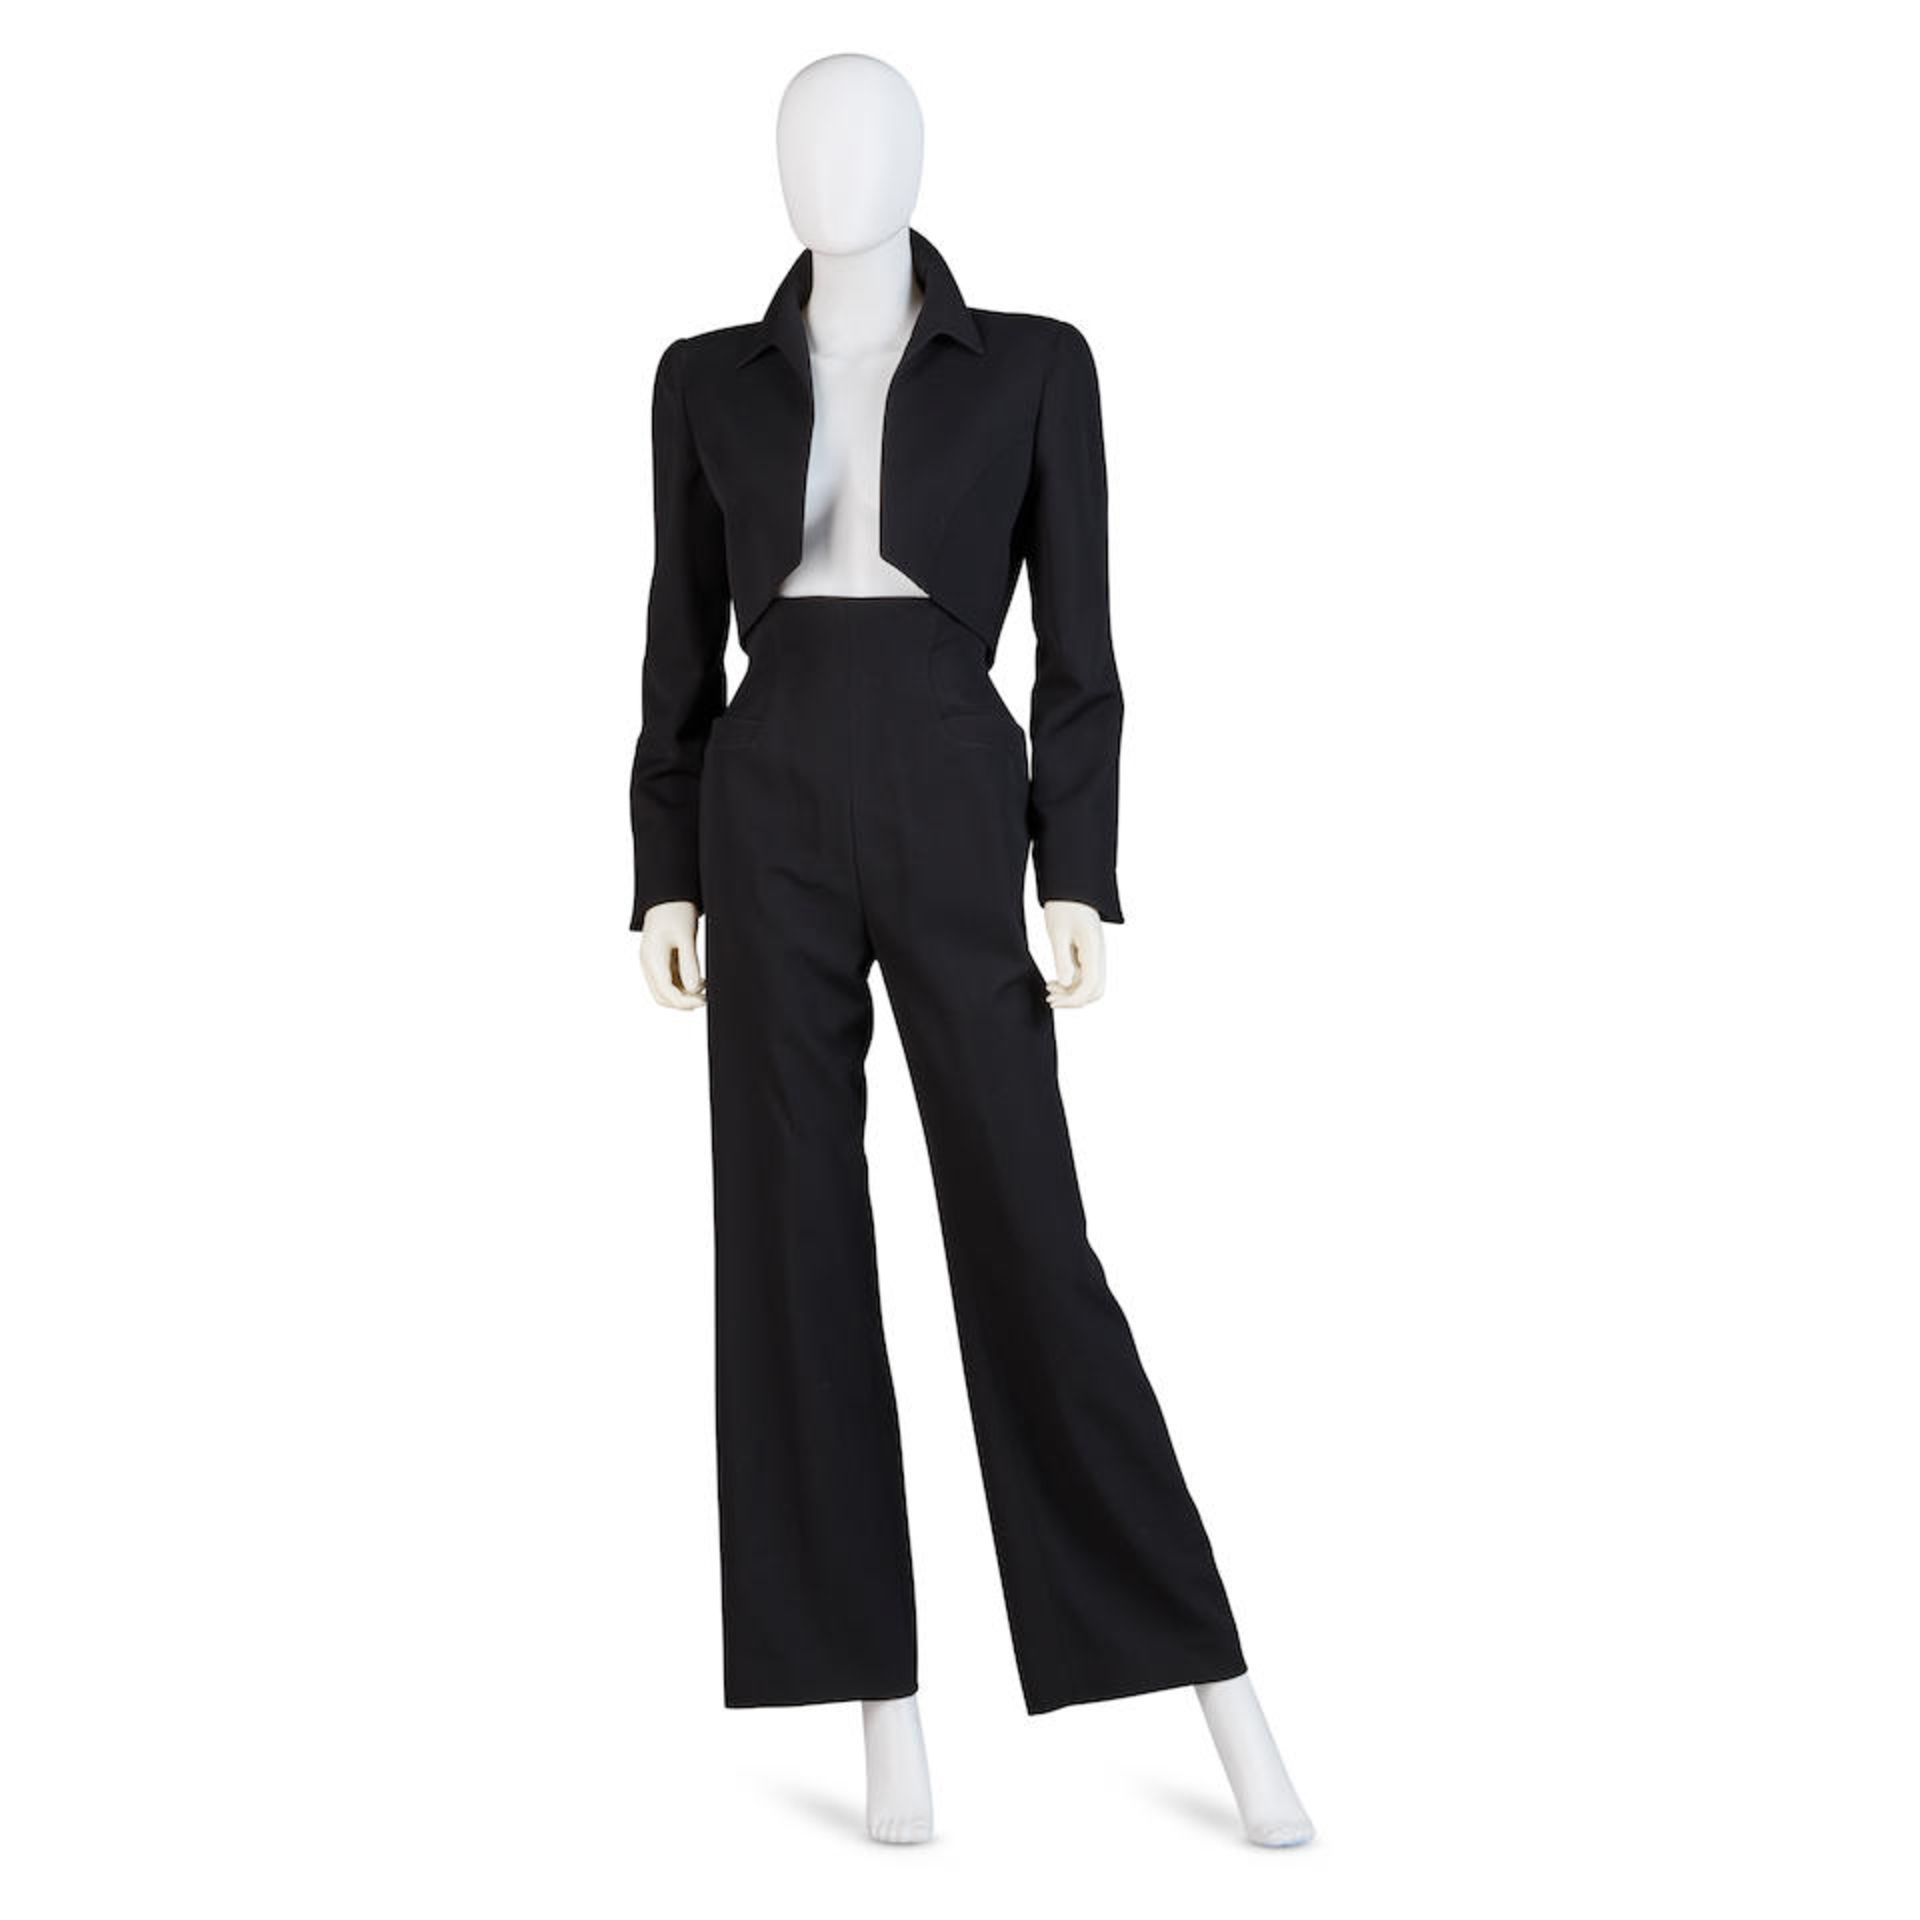 THIERRY MUGLER: CROPPED JACKET AND PANT ENSEMBLE 1980's